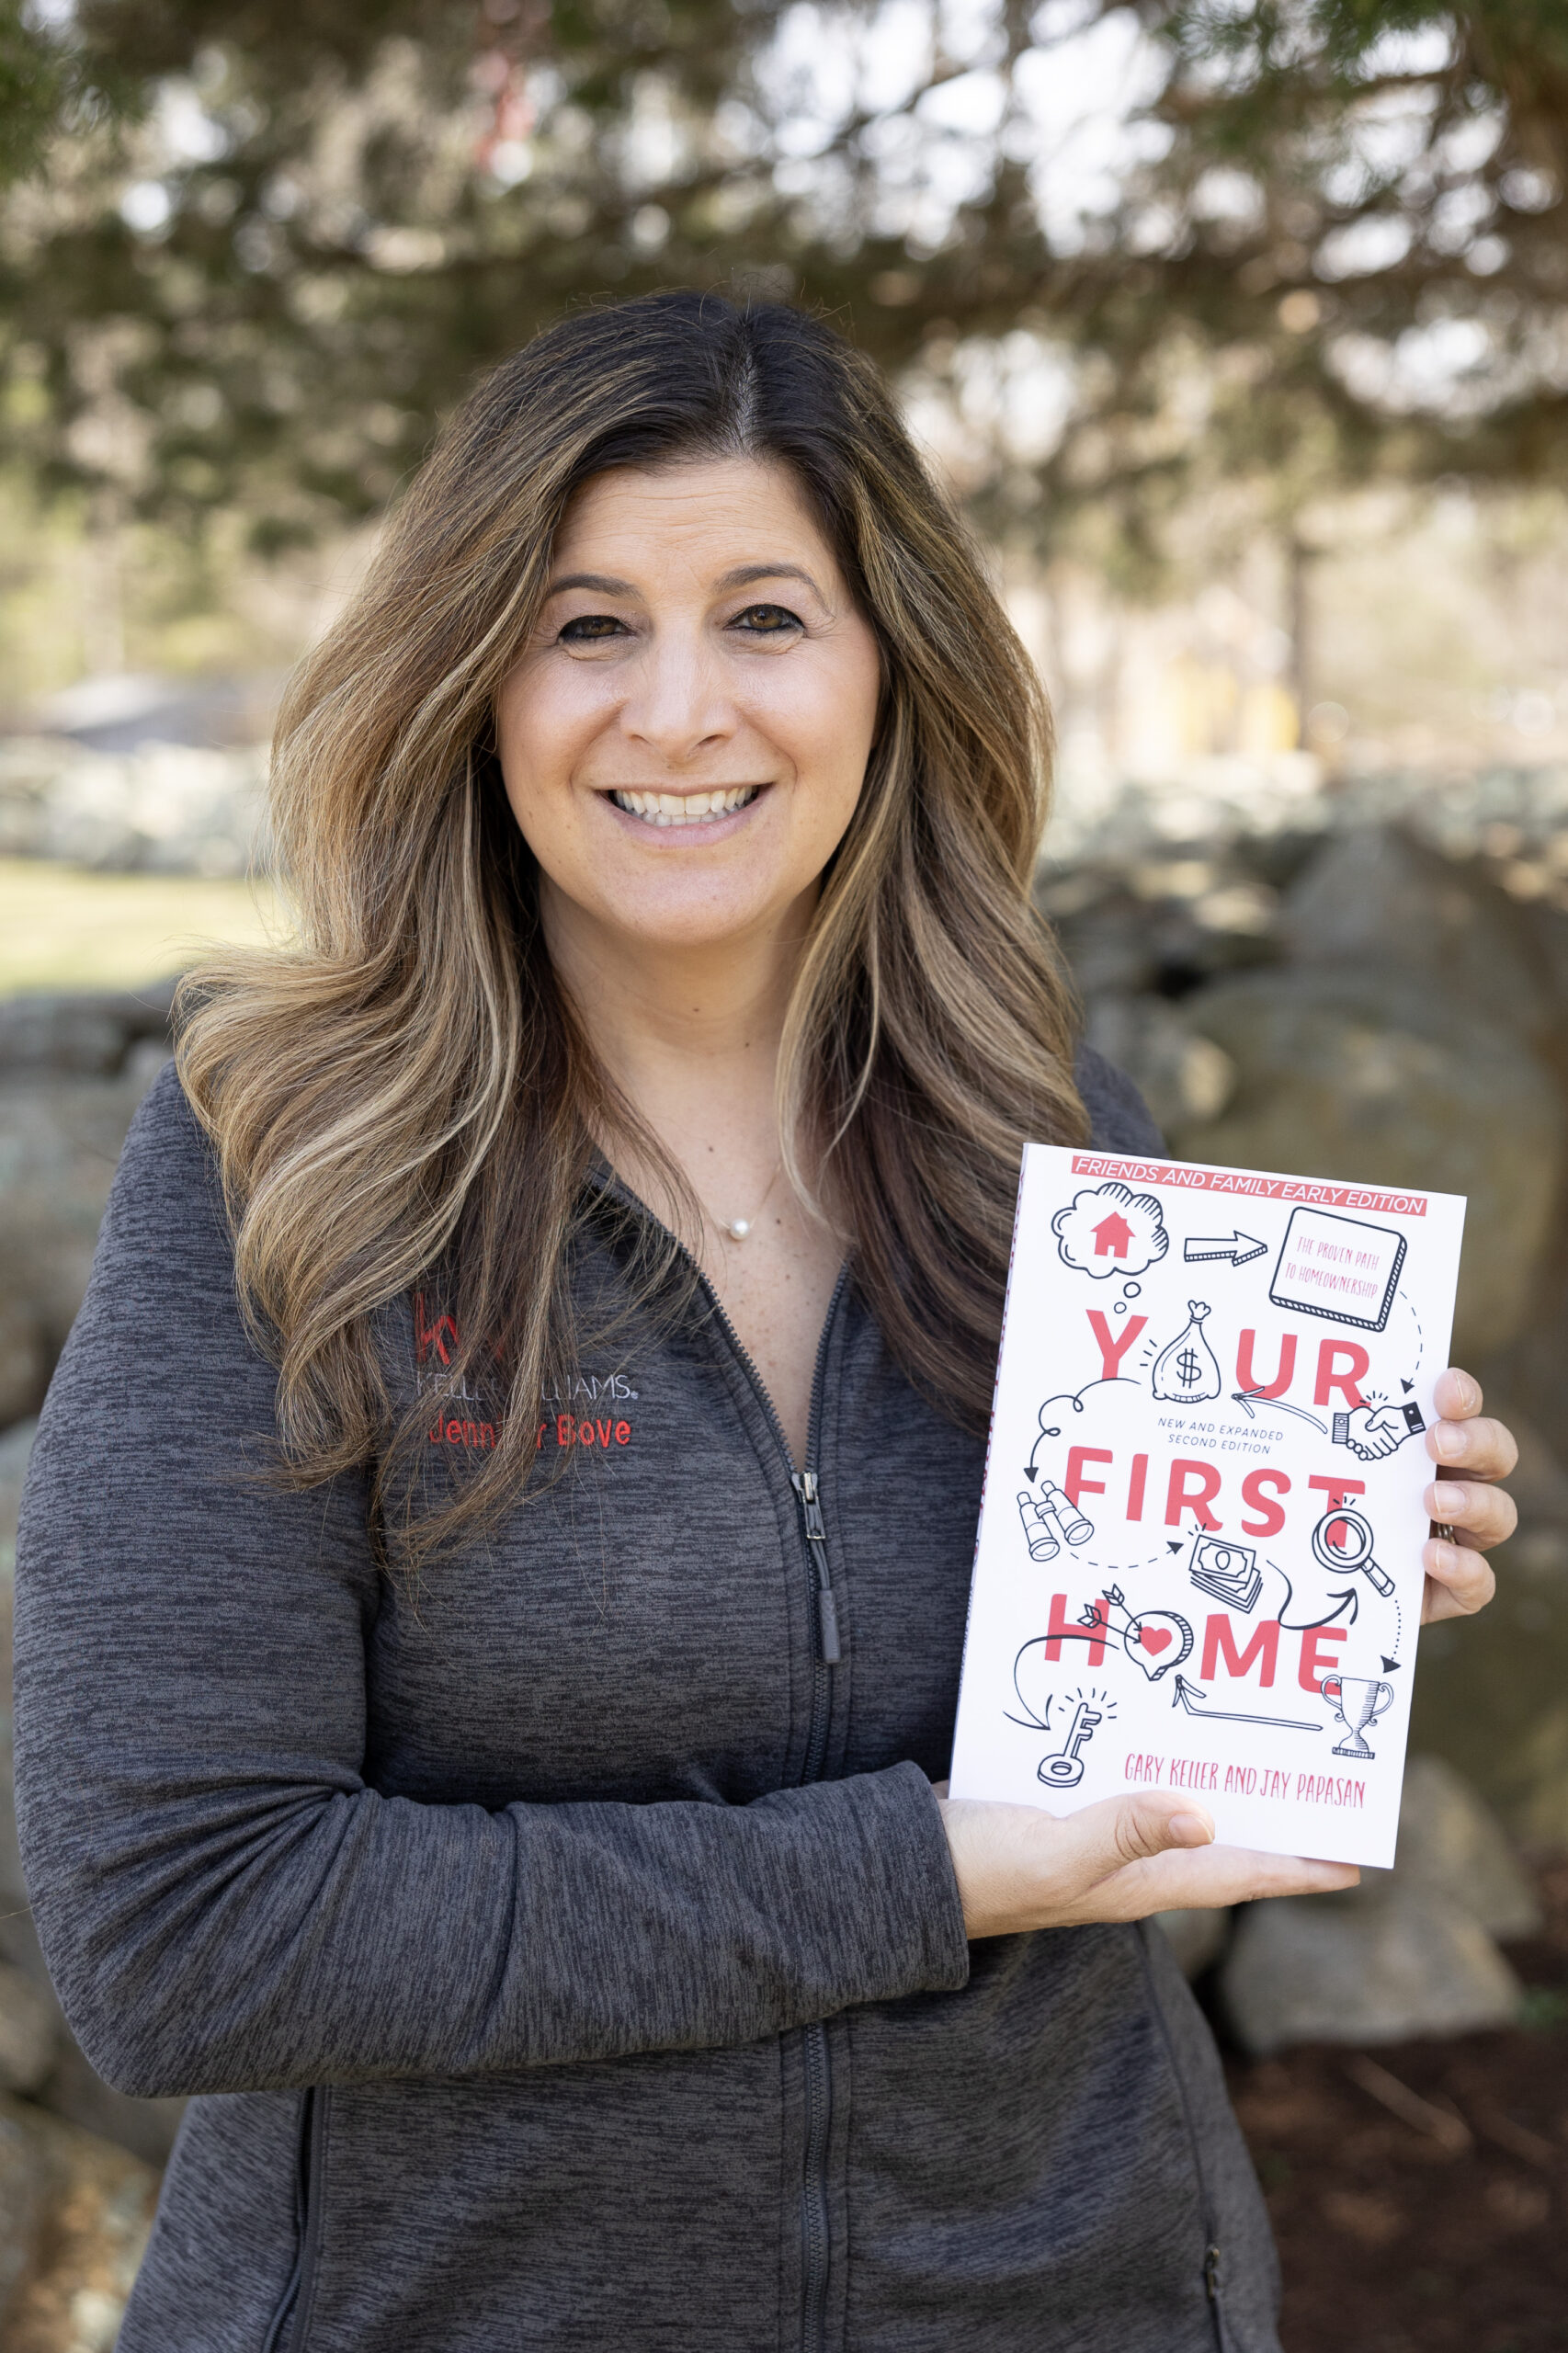 Preparing to Buy Your First Home: tips from real estate agent Jen Bove on Wedding Secrets Unveiled! Podcast for first-time buyers